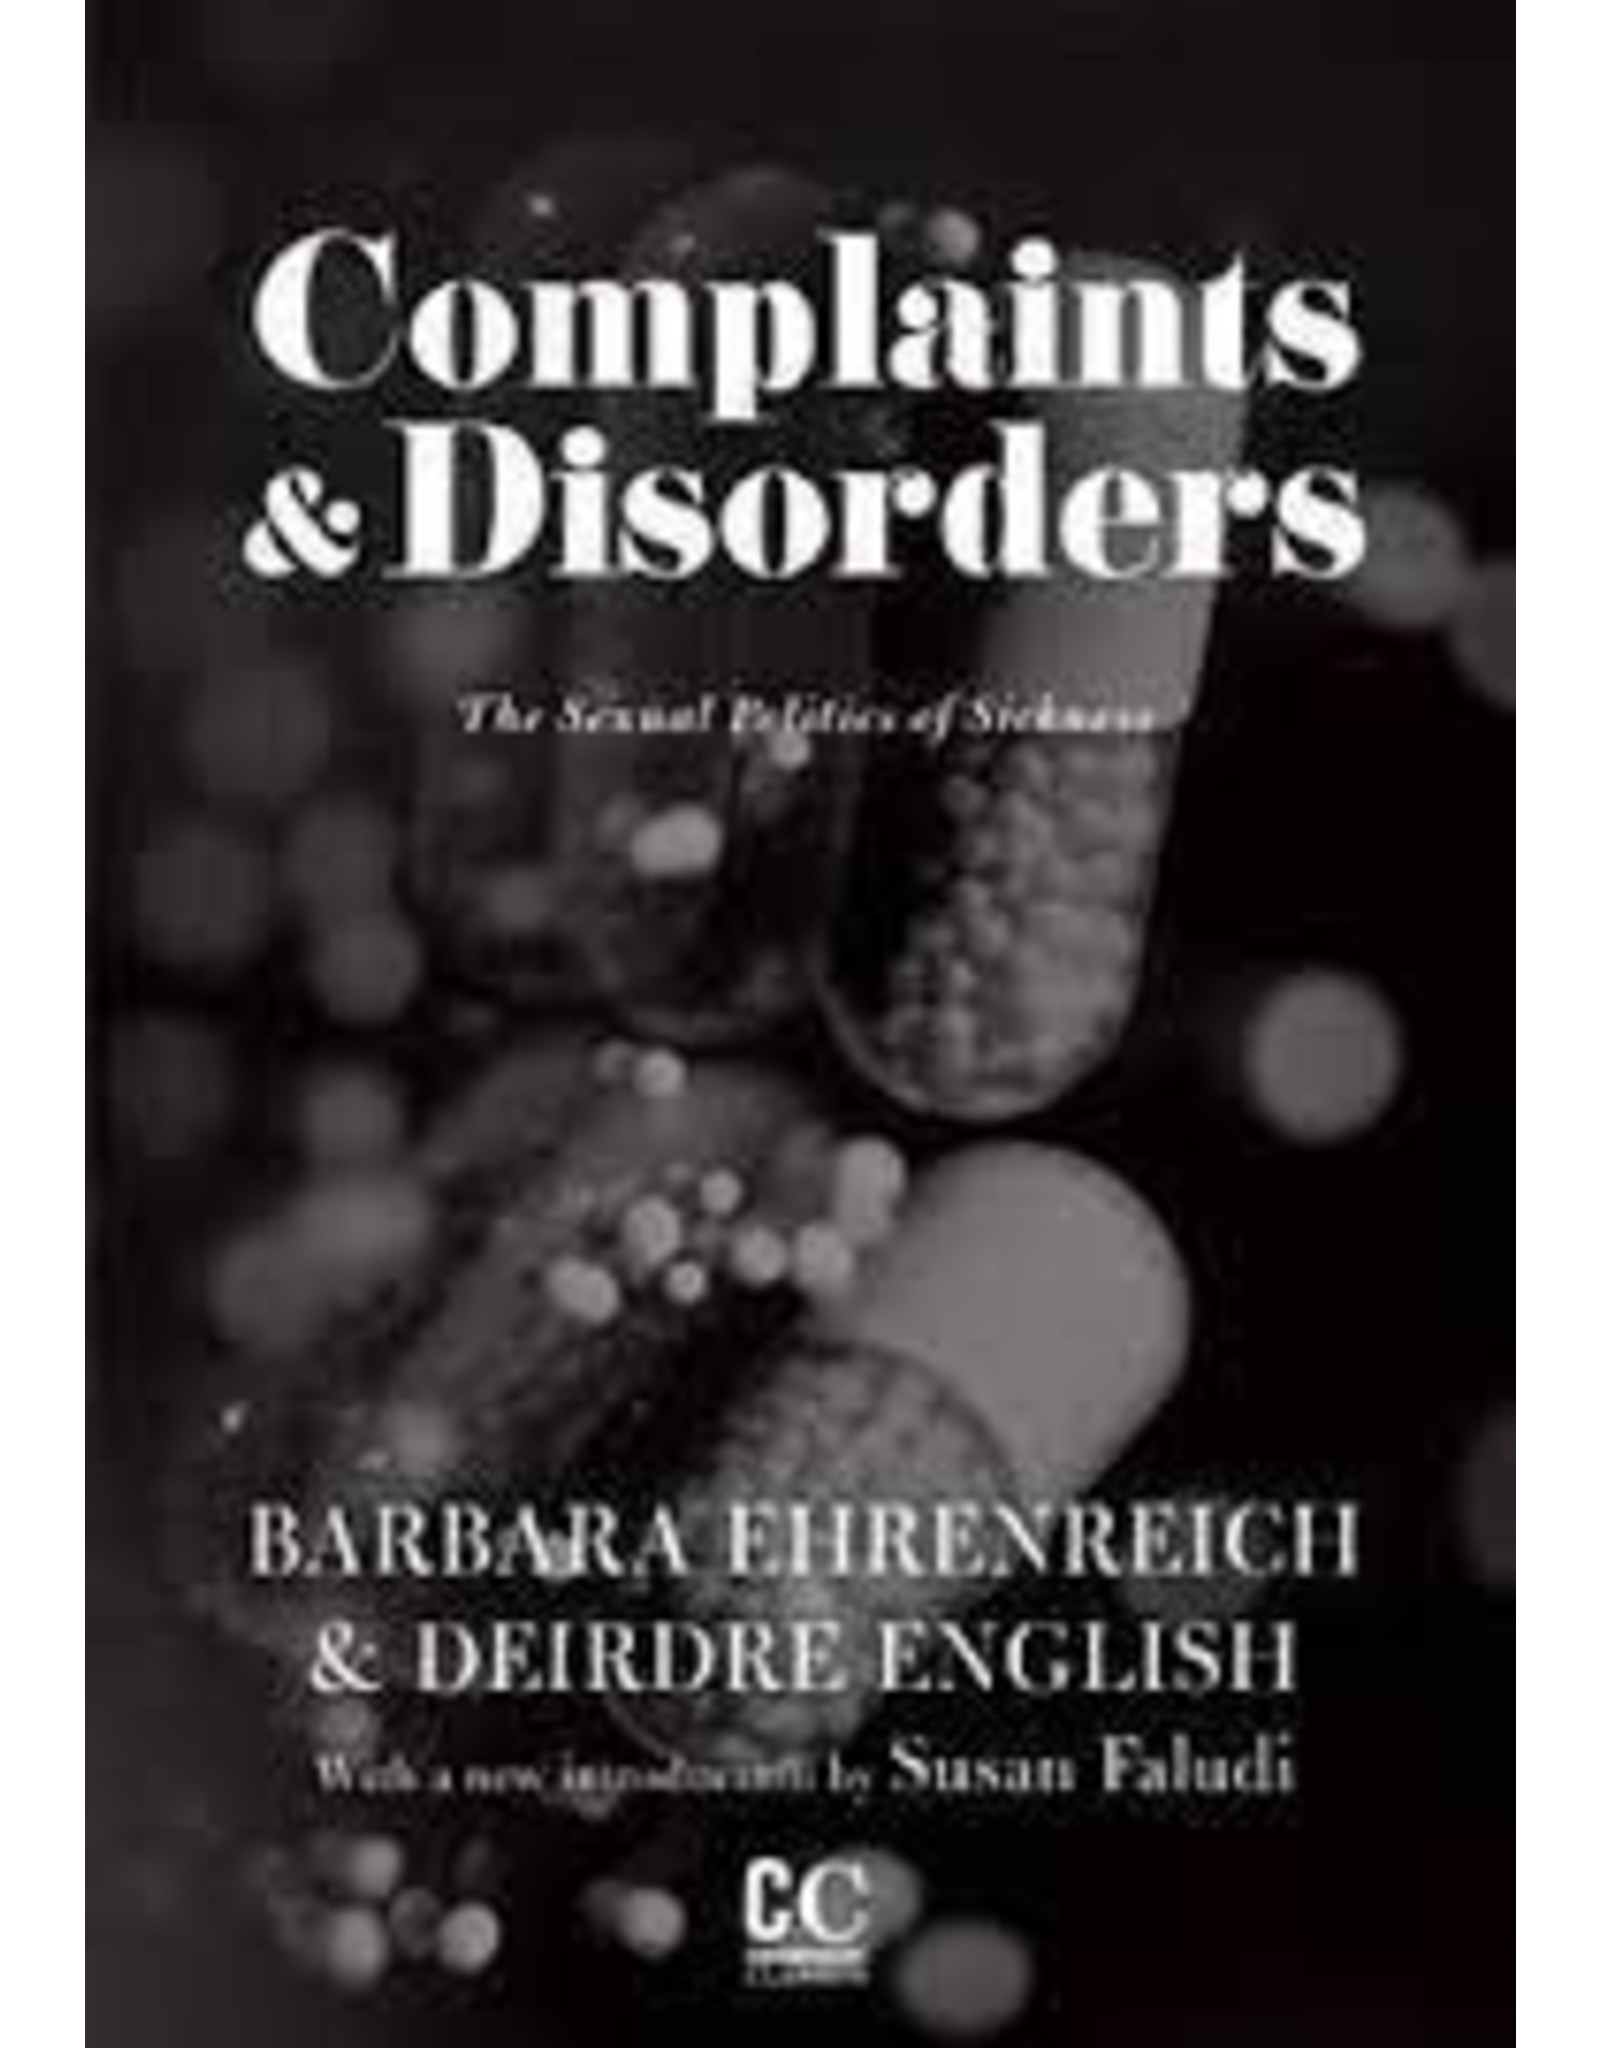 Literature Complaints and Disorders: The Sexual Politics of Sickness